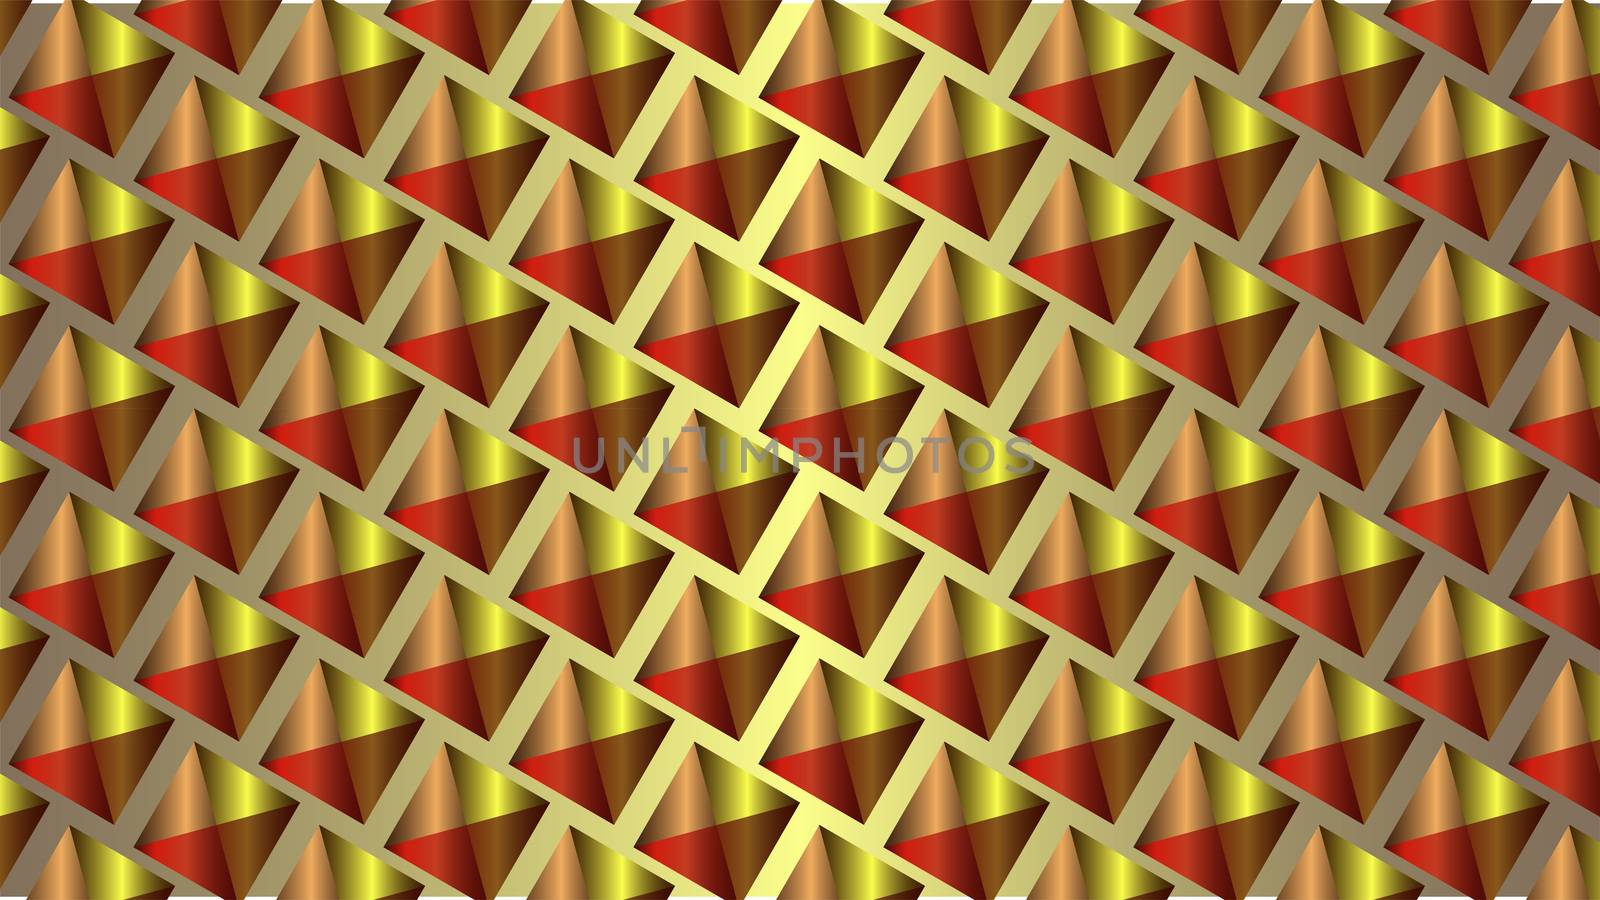 Lovely geometric shapes pattern for designs to be use in textile, interiors and other printing material for fashion and beauty materials. Beautiful wall tiles Decor, wallpaper, linoleum, textile, web page background, Texture